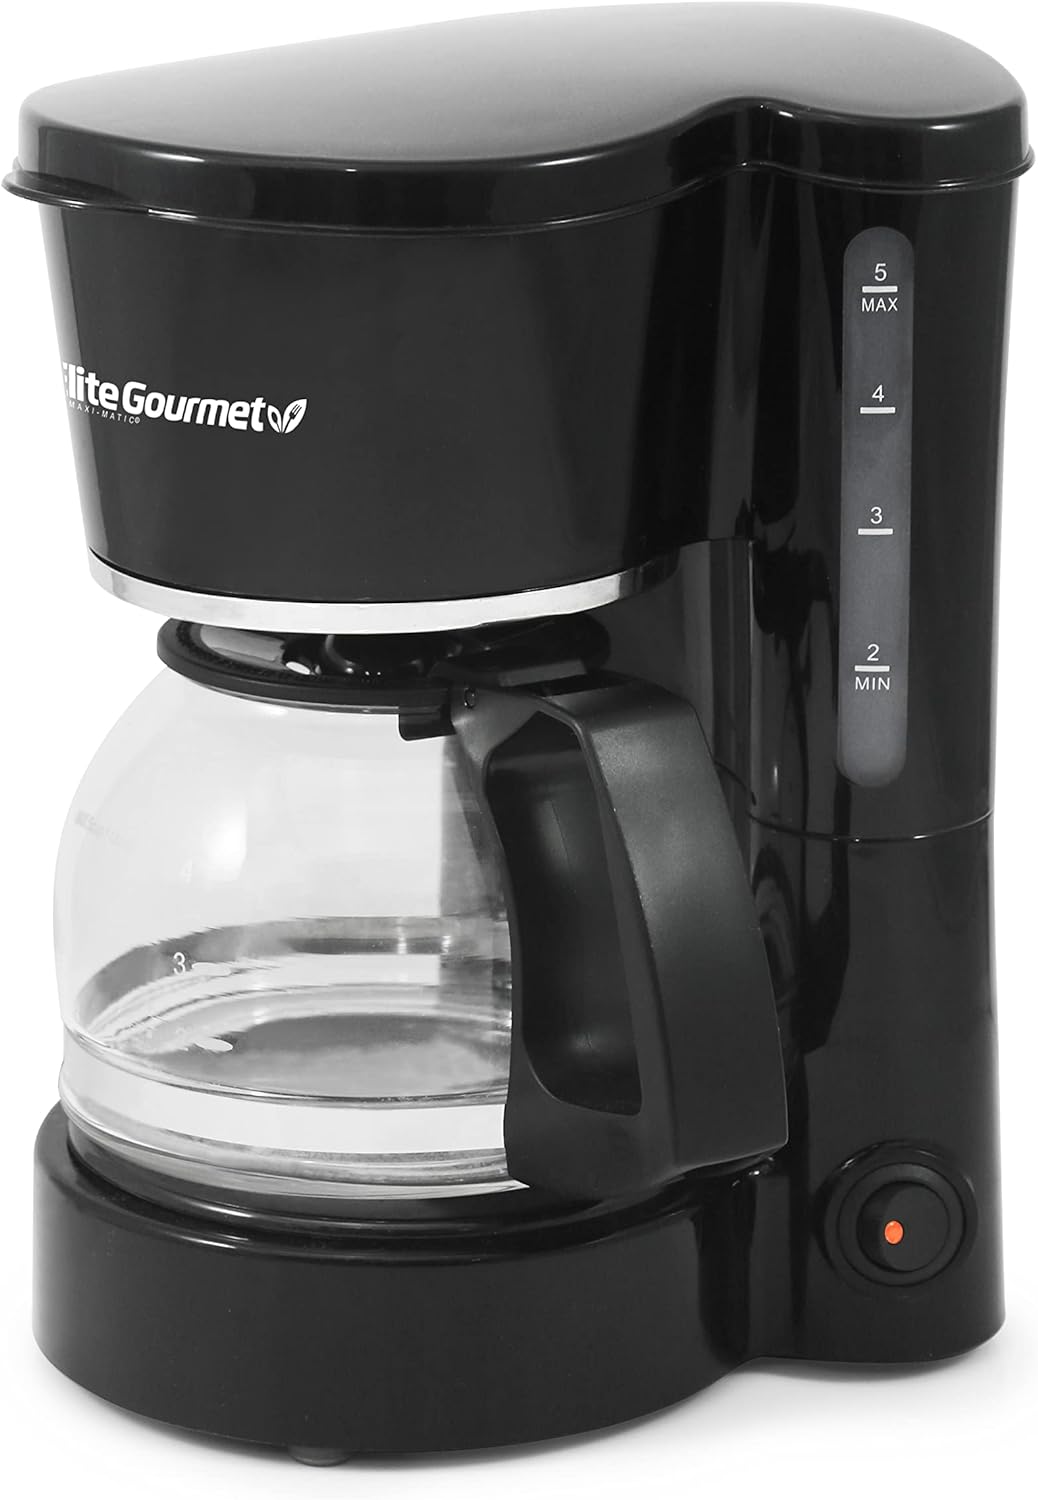 Elite Gourmet EHC-5055 Automatic Brew  Drip Coffee Maker with Pause N Serve Reusable Filter, On/Off Switch, Water Level Indicator, Black